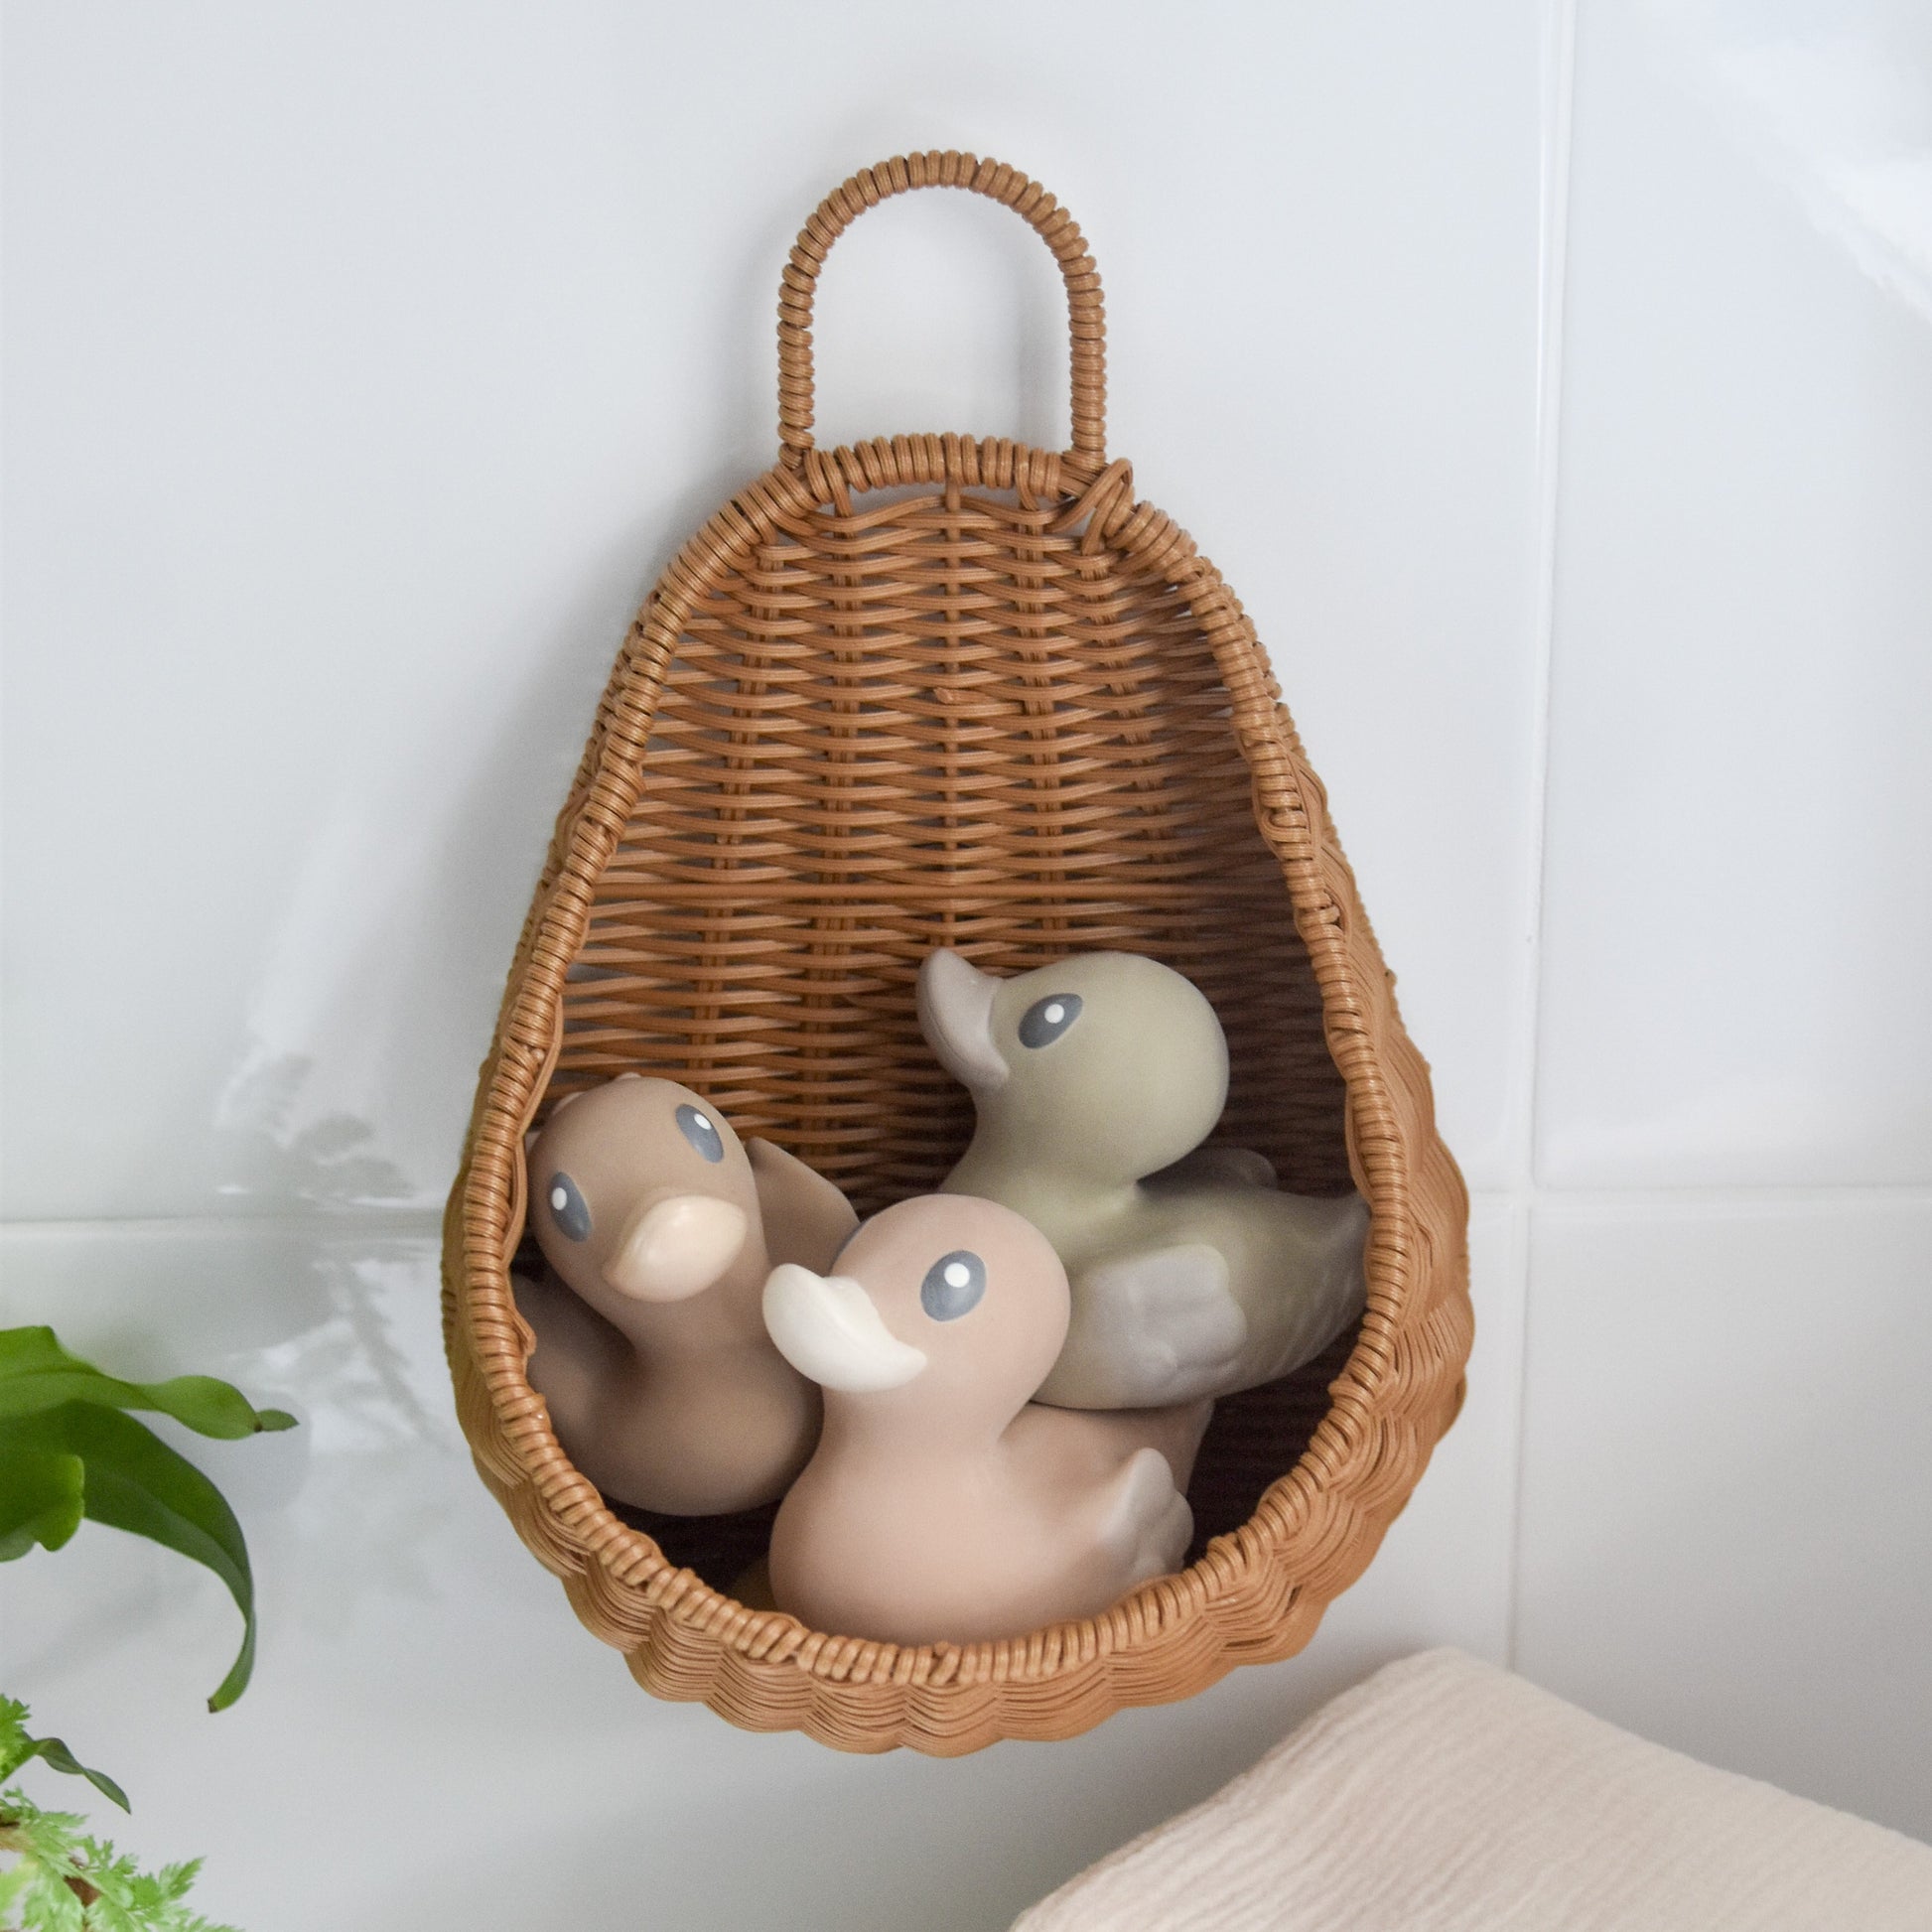 bath storage basket woven from recycled plastic rattan, attached to a bathroom wall with a suction cap, storing three rubber duck bath toy